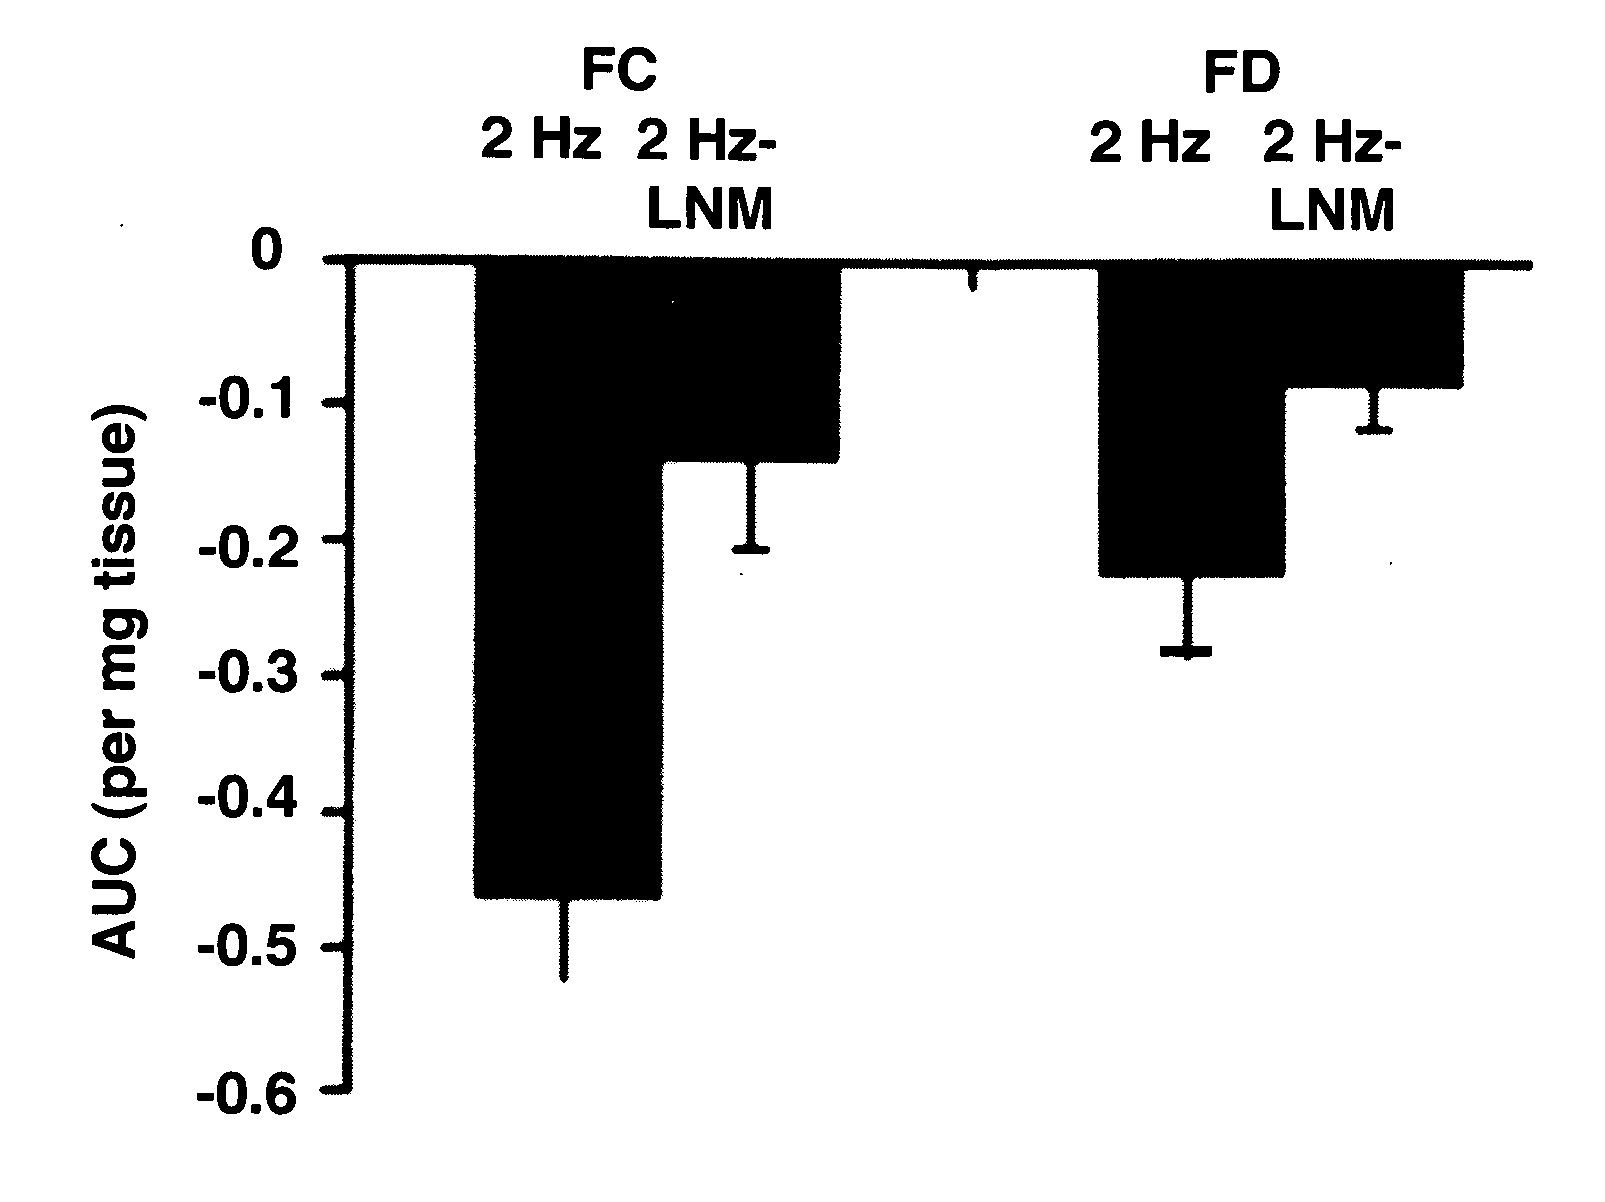 Uses of tetrahydrobiopterin, sepiapterin and derivatives thereof